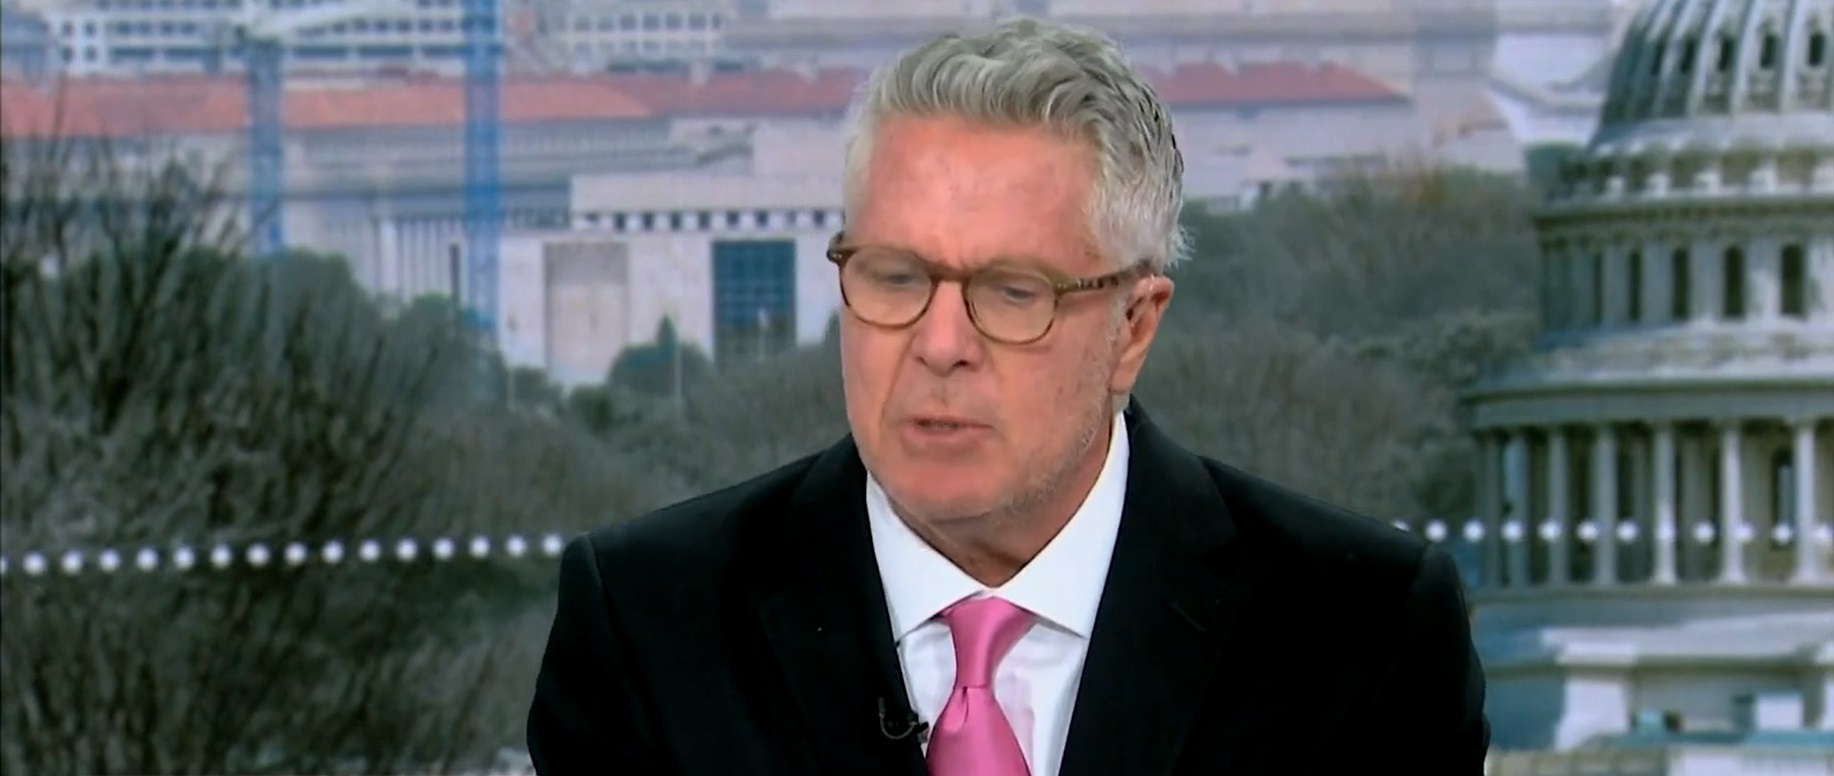 Donny Deutsch Lays Out Biden’s Path To Victory: ‘Scare The Sh*t Out Of People’